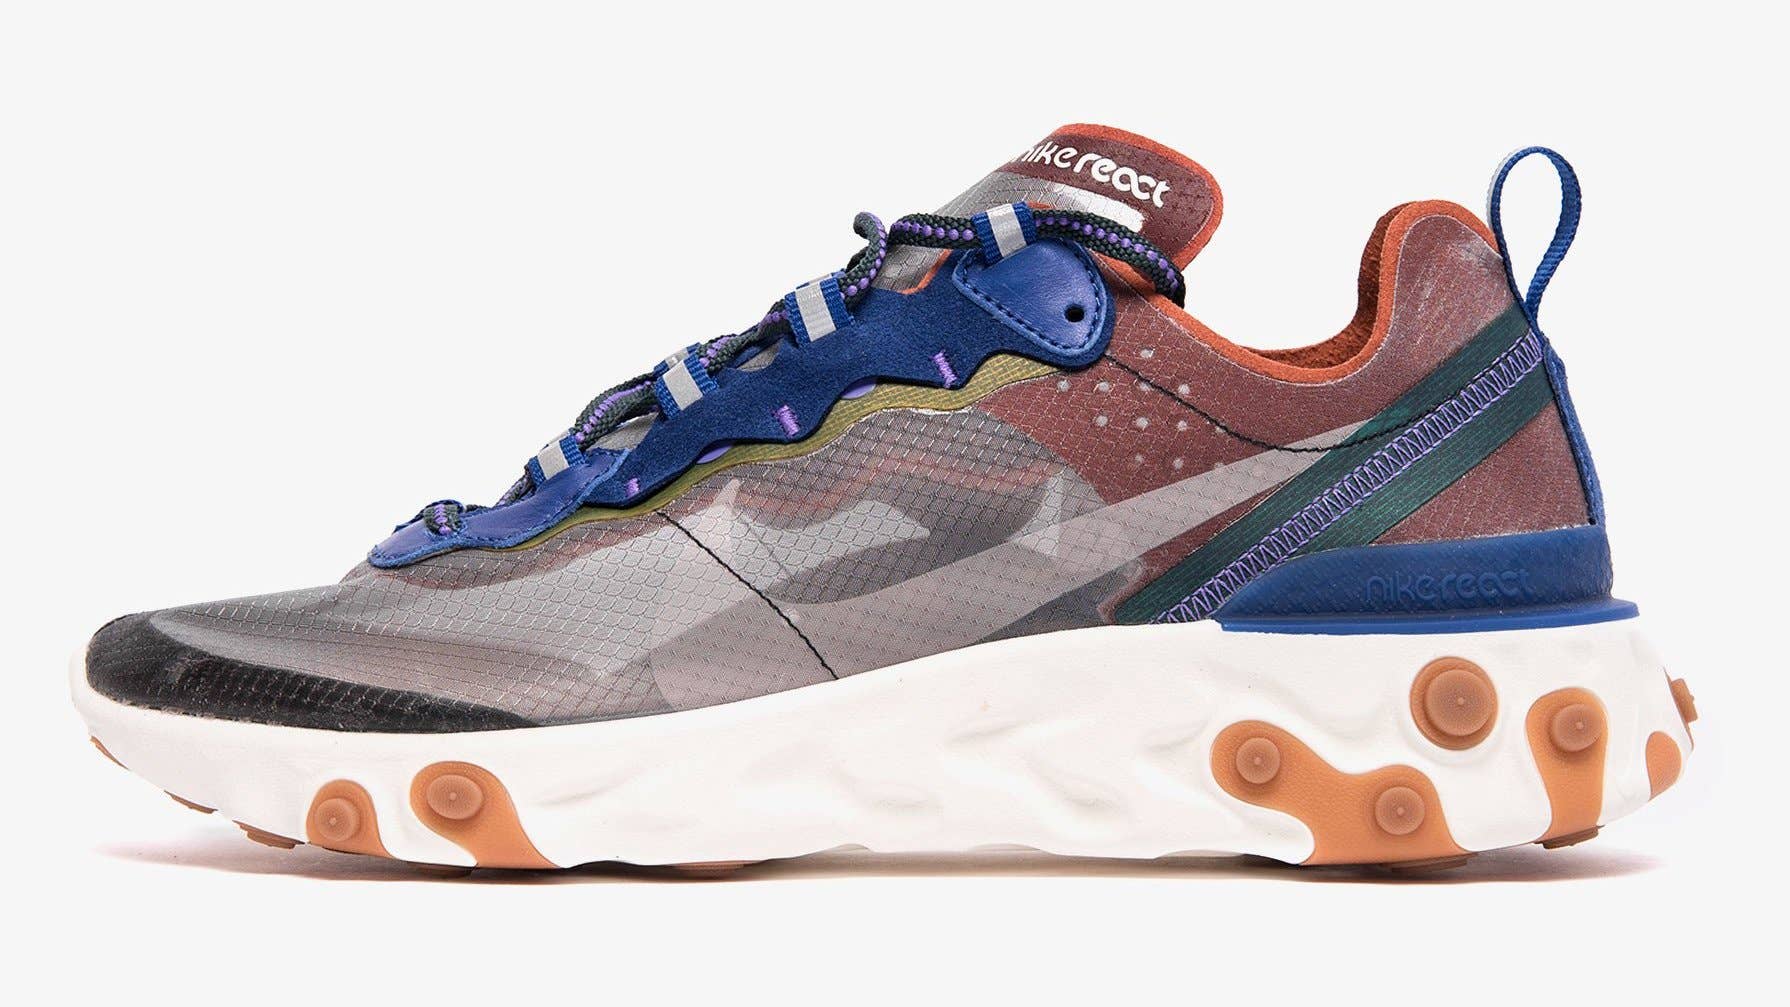 Nike React Element 87 'Dusty Peach/Atmosphere Grey' AQ1090 200 (Lateral)